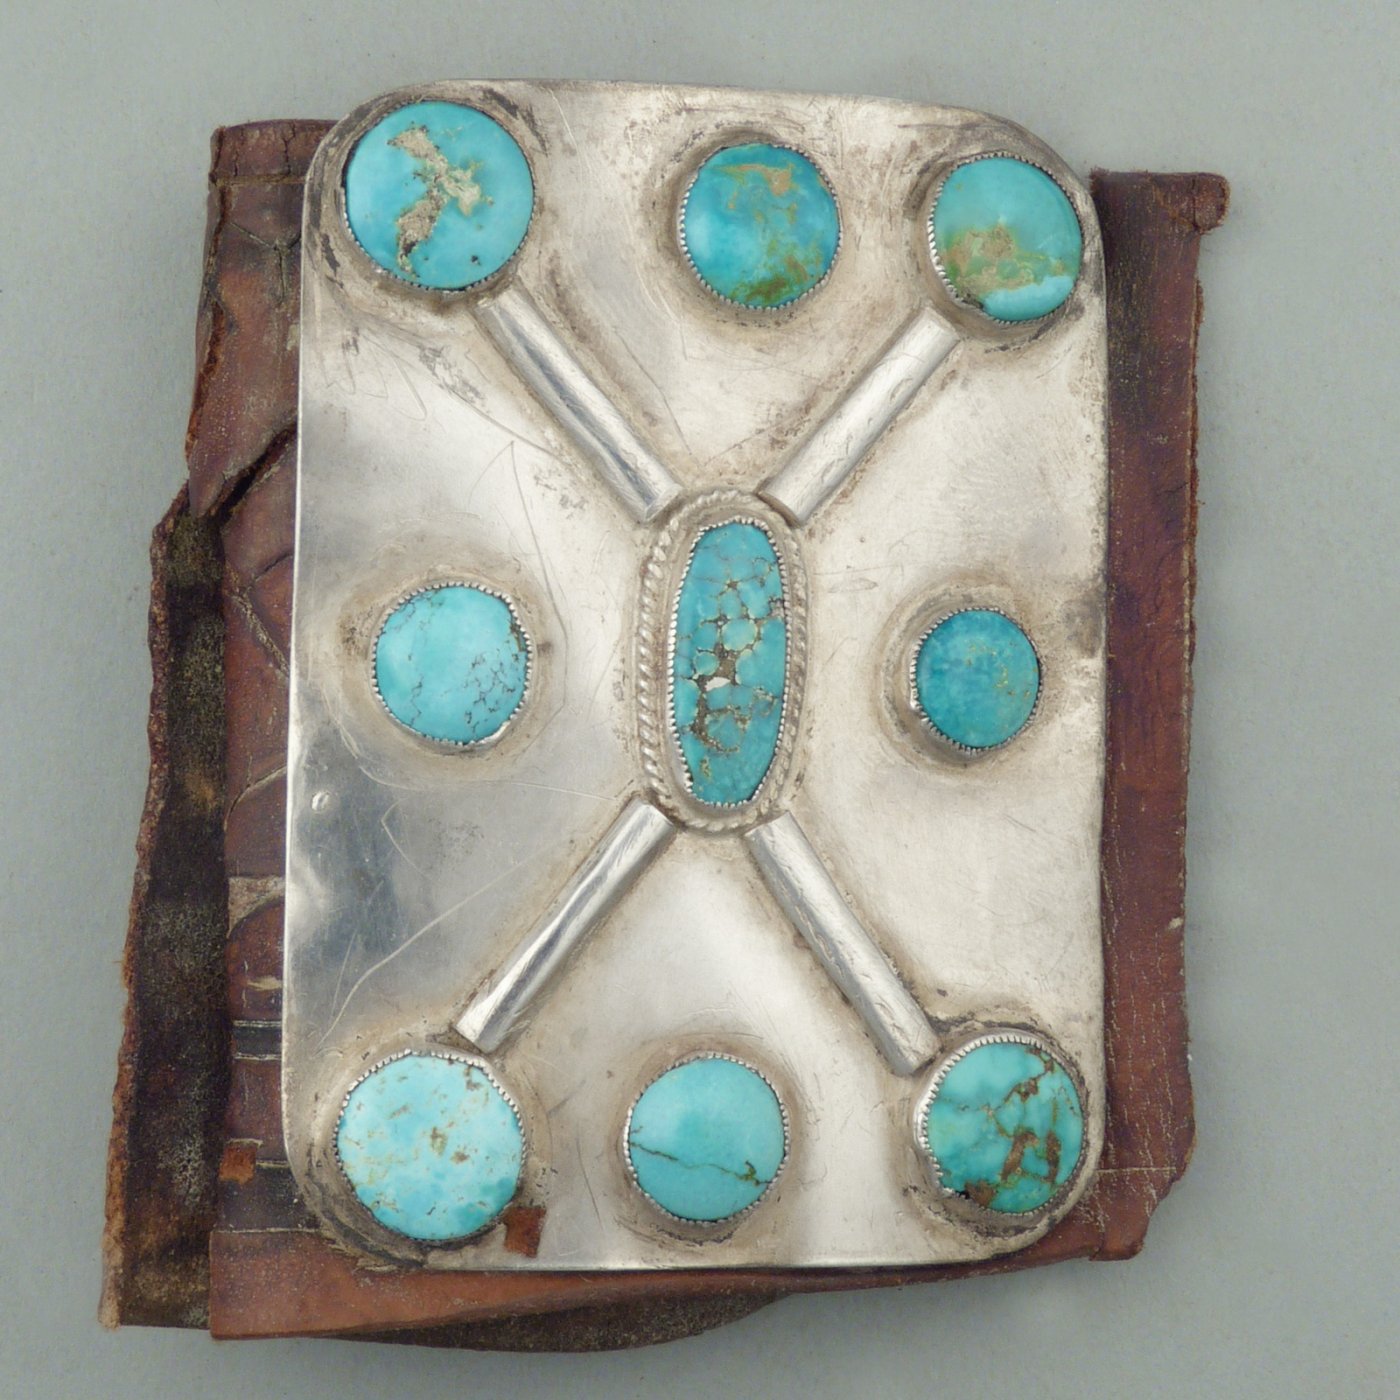 Zuni Silver Ketoh with Repousse and Nine Turquoise Cabochons, c.1950 ...